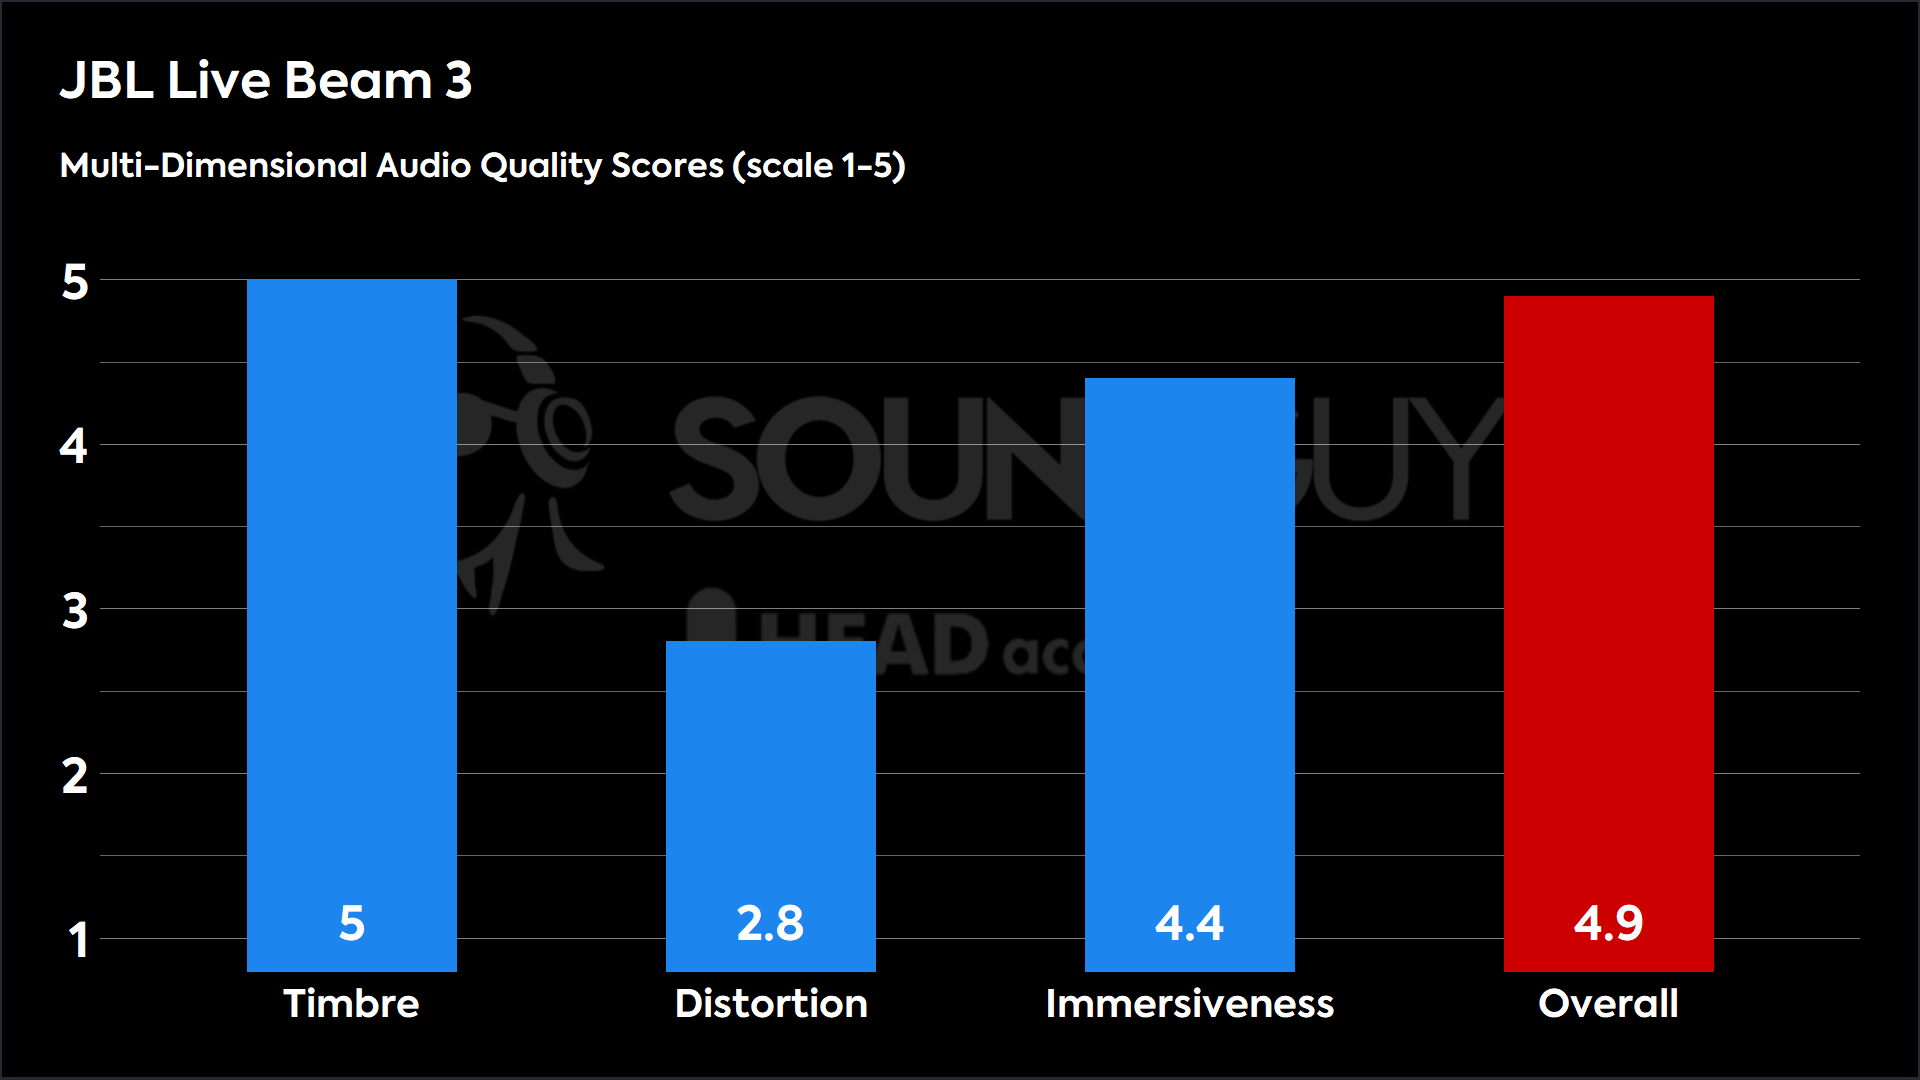 This chart shows the MDAQS results for the JBL Live Beam 3 in Default mode. The Timbre score is 5, The Distortion score is 2.8, the Immersiveness score is 4.4, and the Overall Score is 4.9).